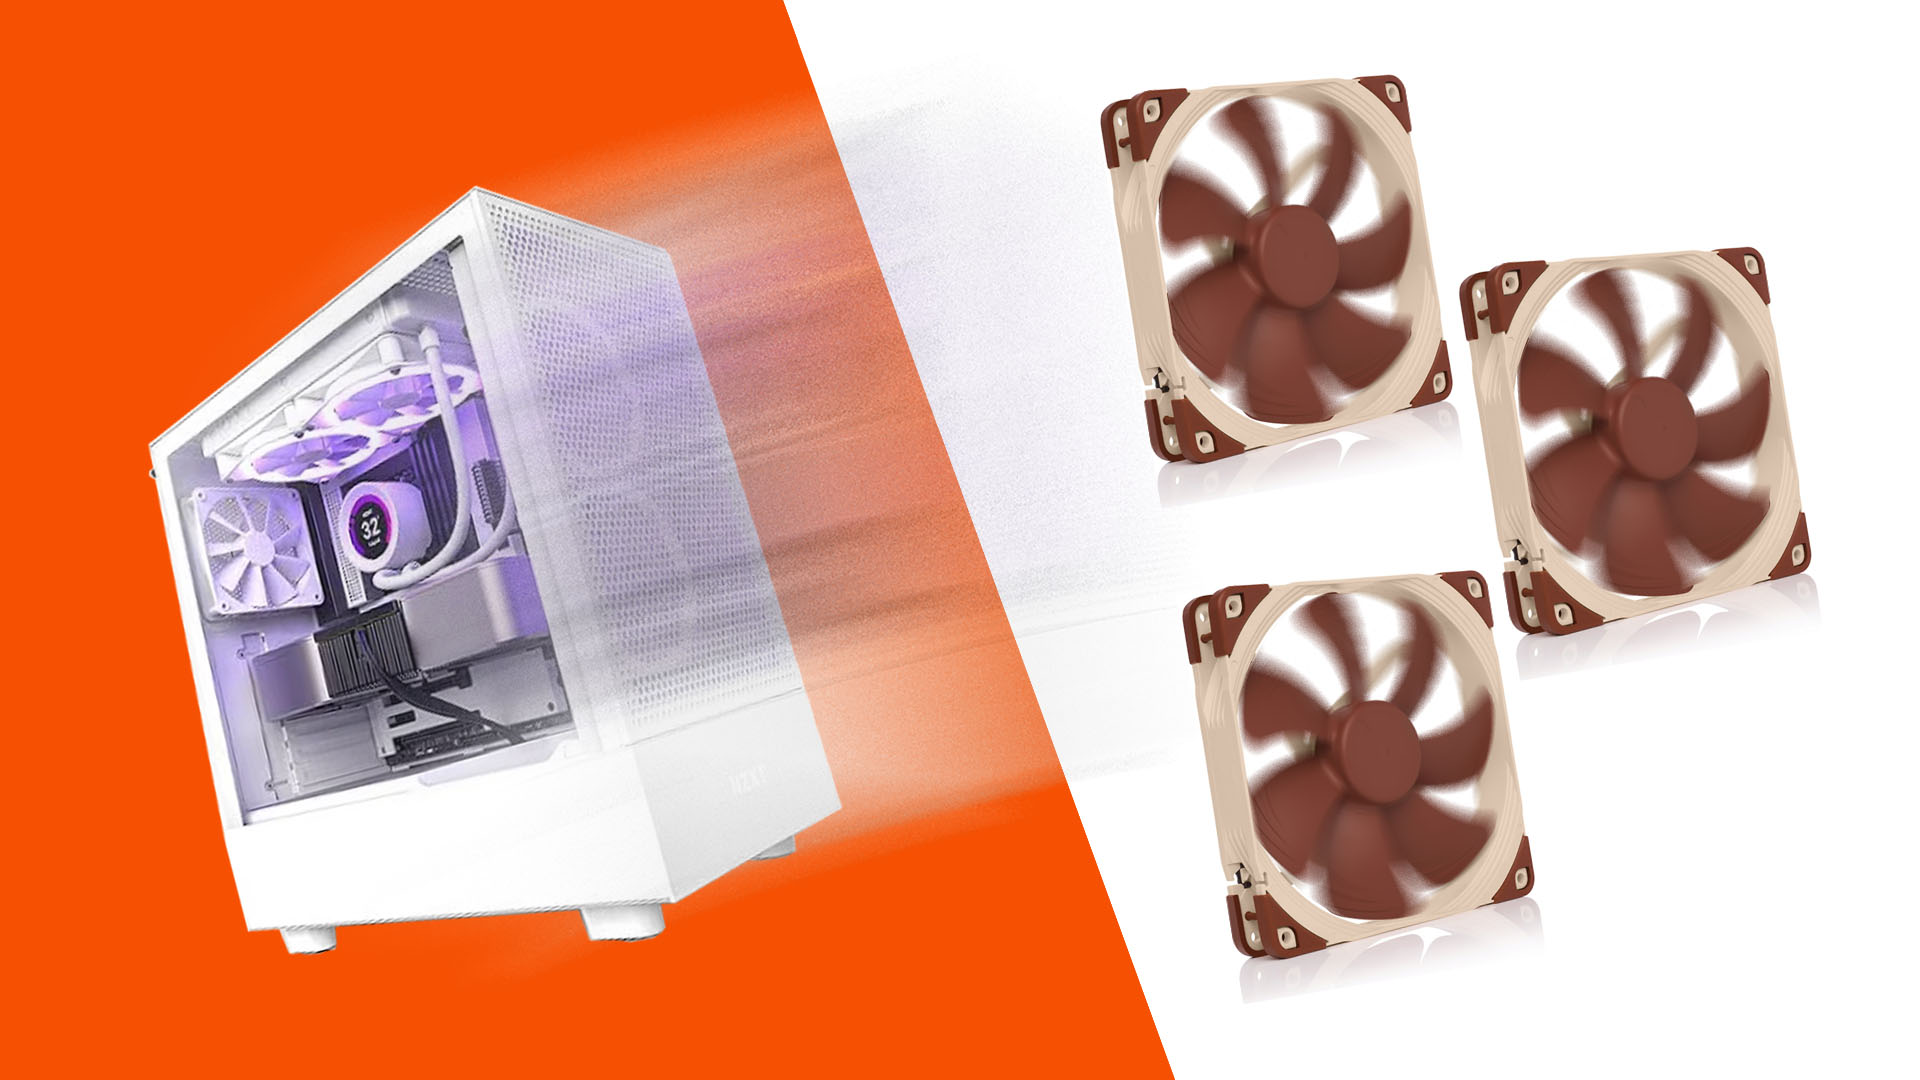 White gaming PC builds just got harder thanks to Noctua